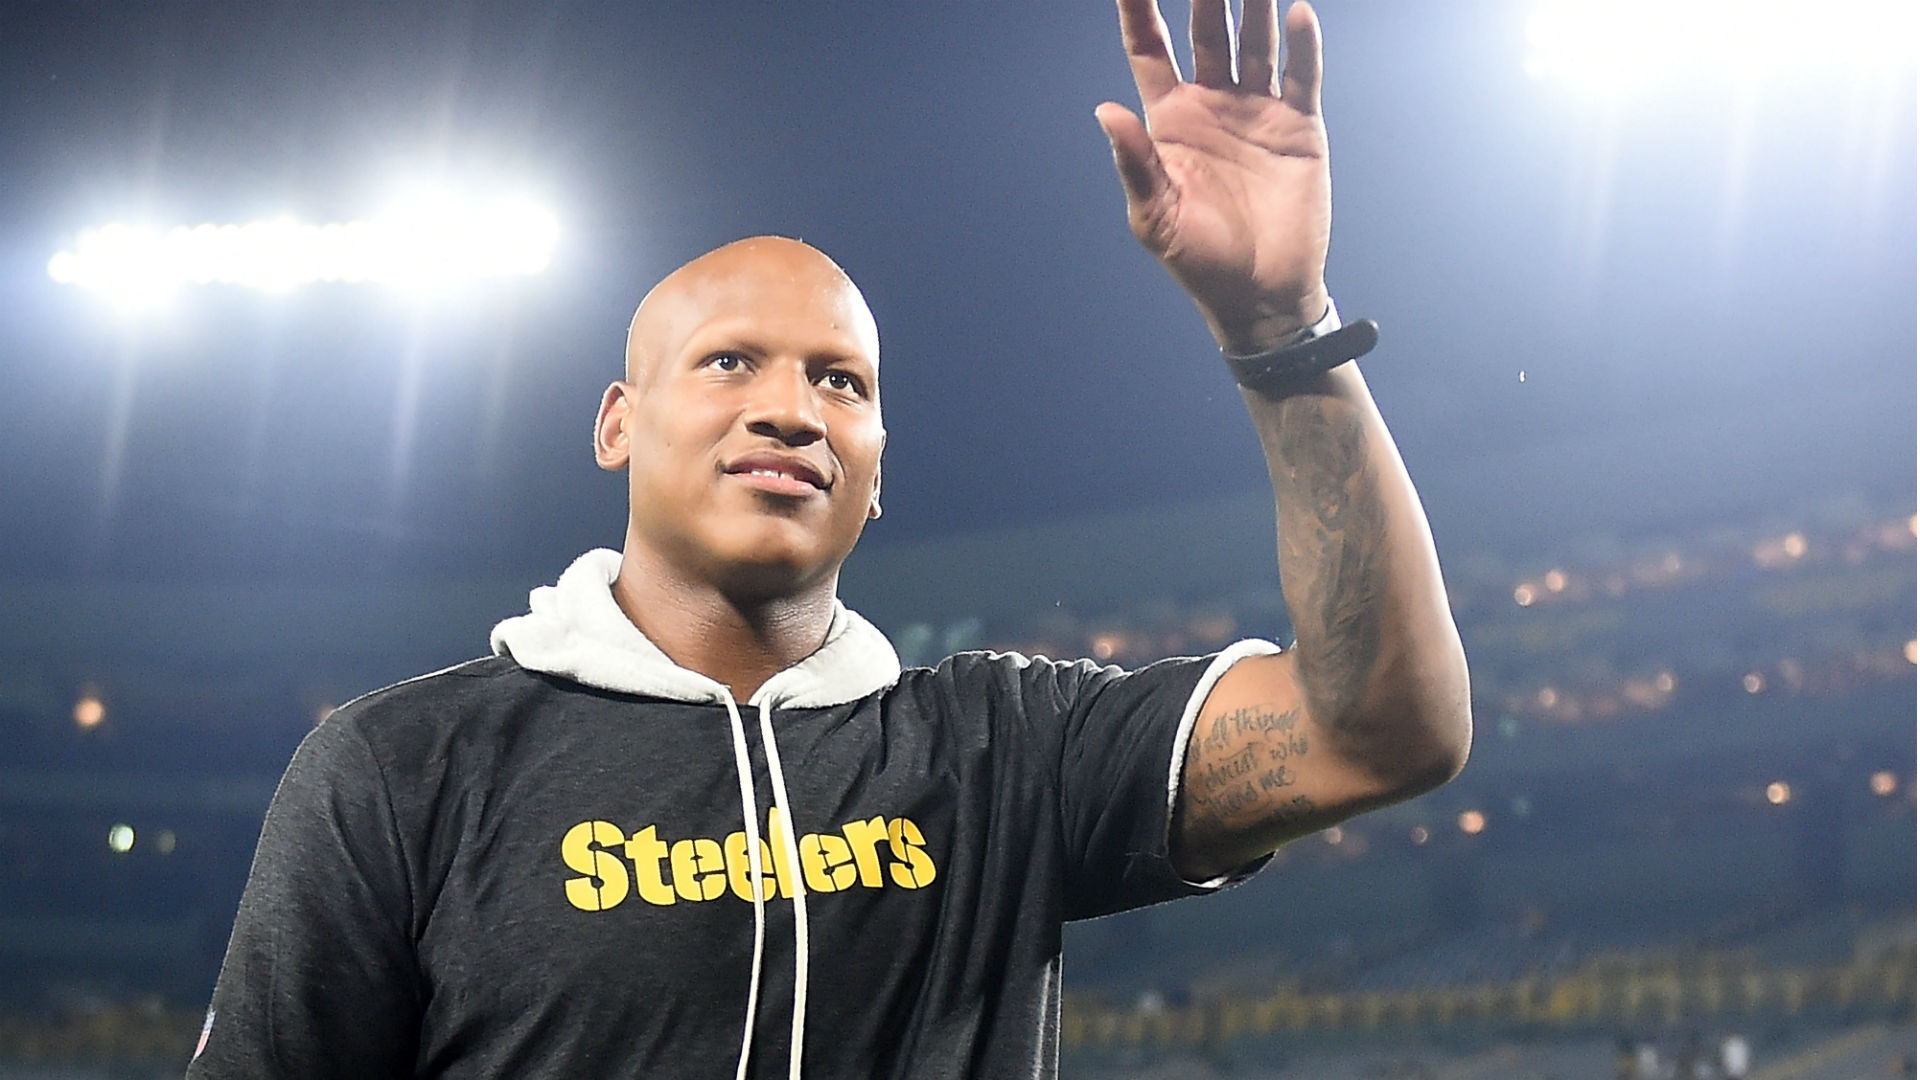 Steelers' Ryan Shazier dances at his wedding nearly 18 months after horrific injury